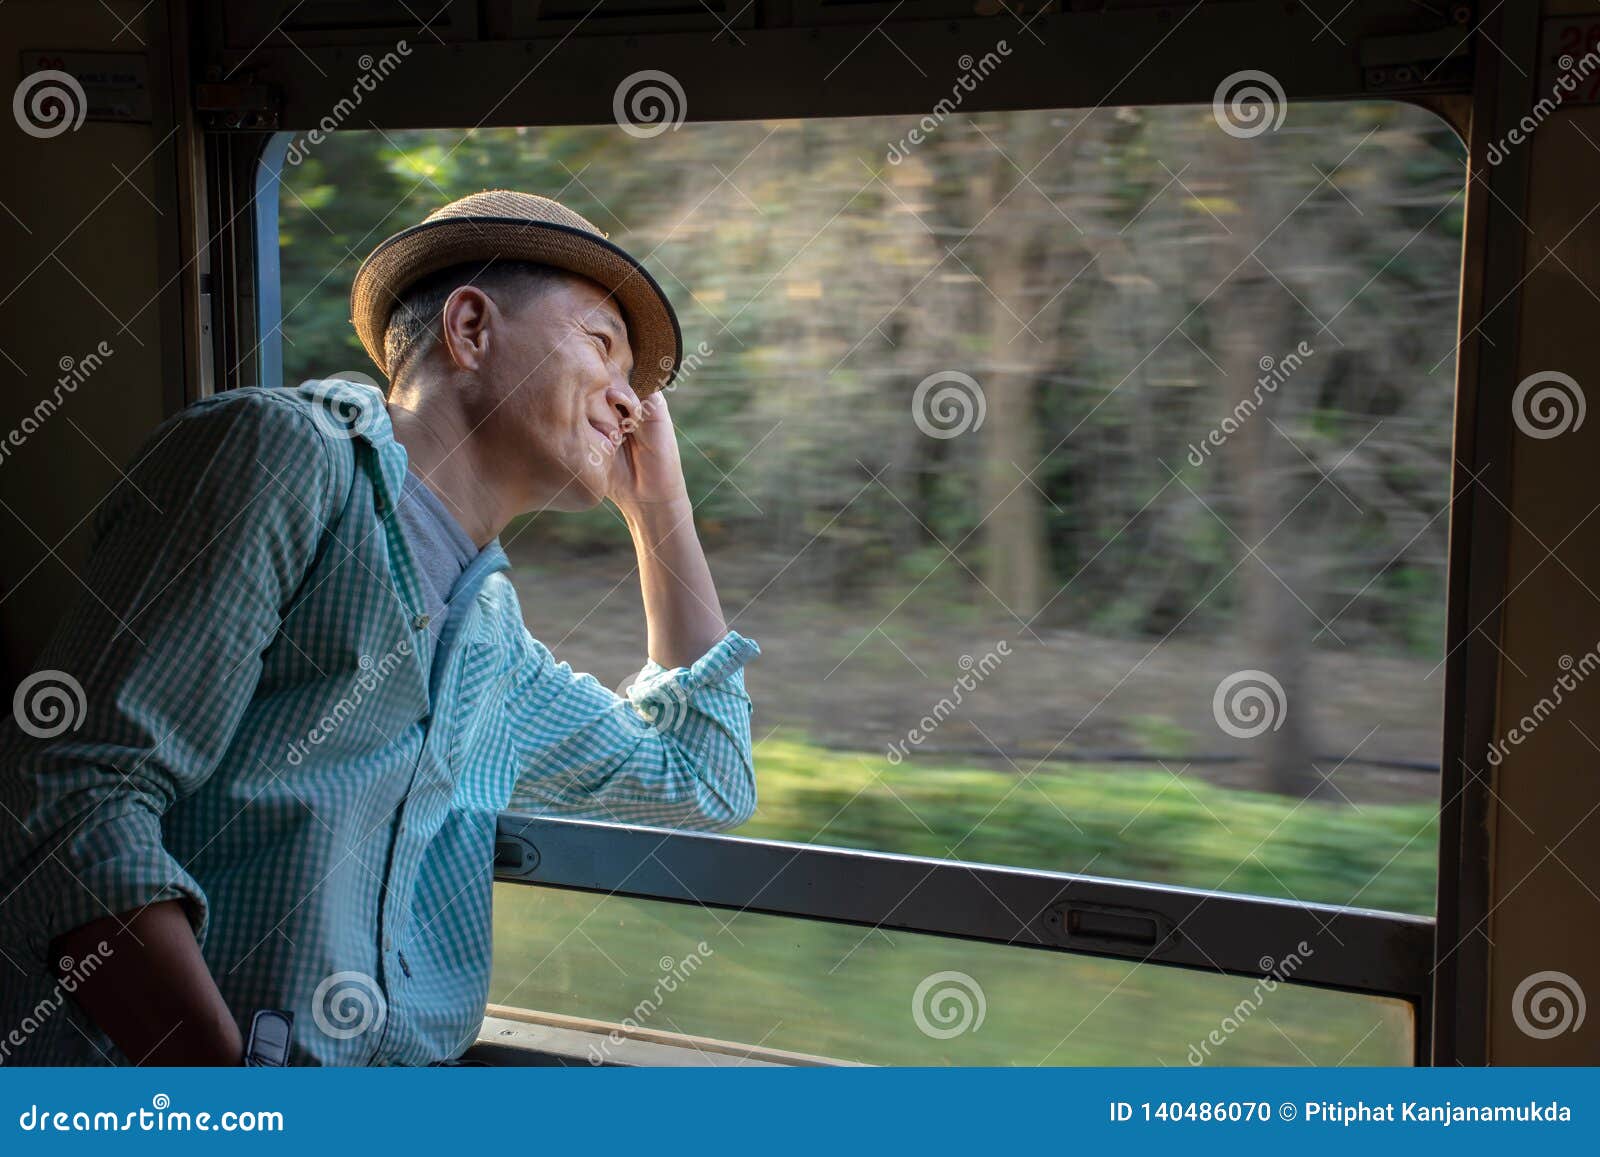 asian passenger wearing hat looking out of train window